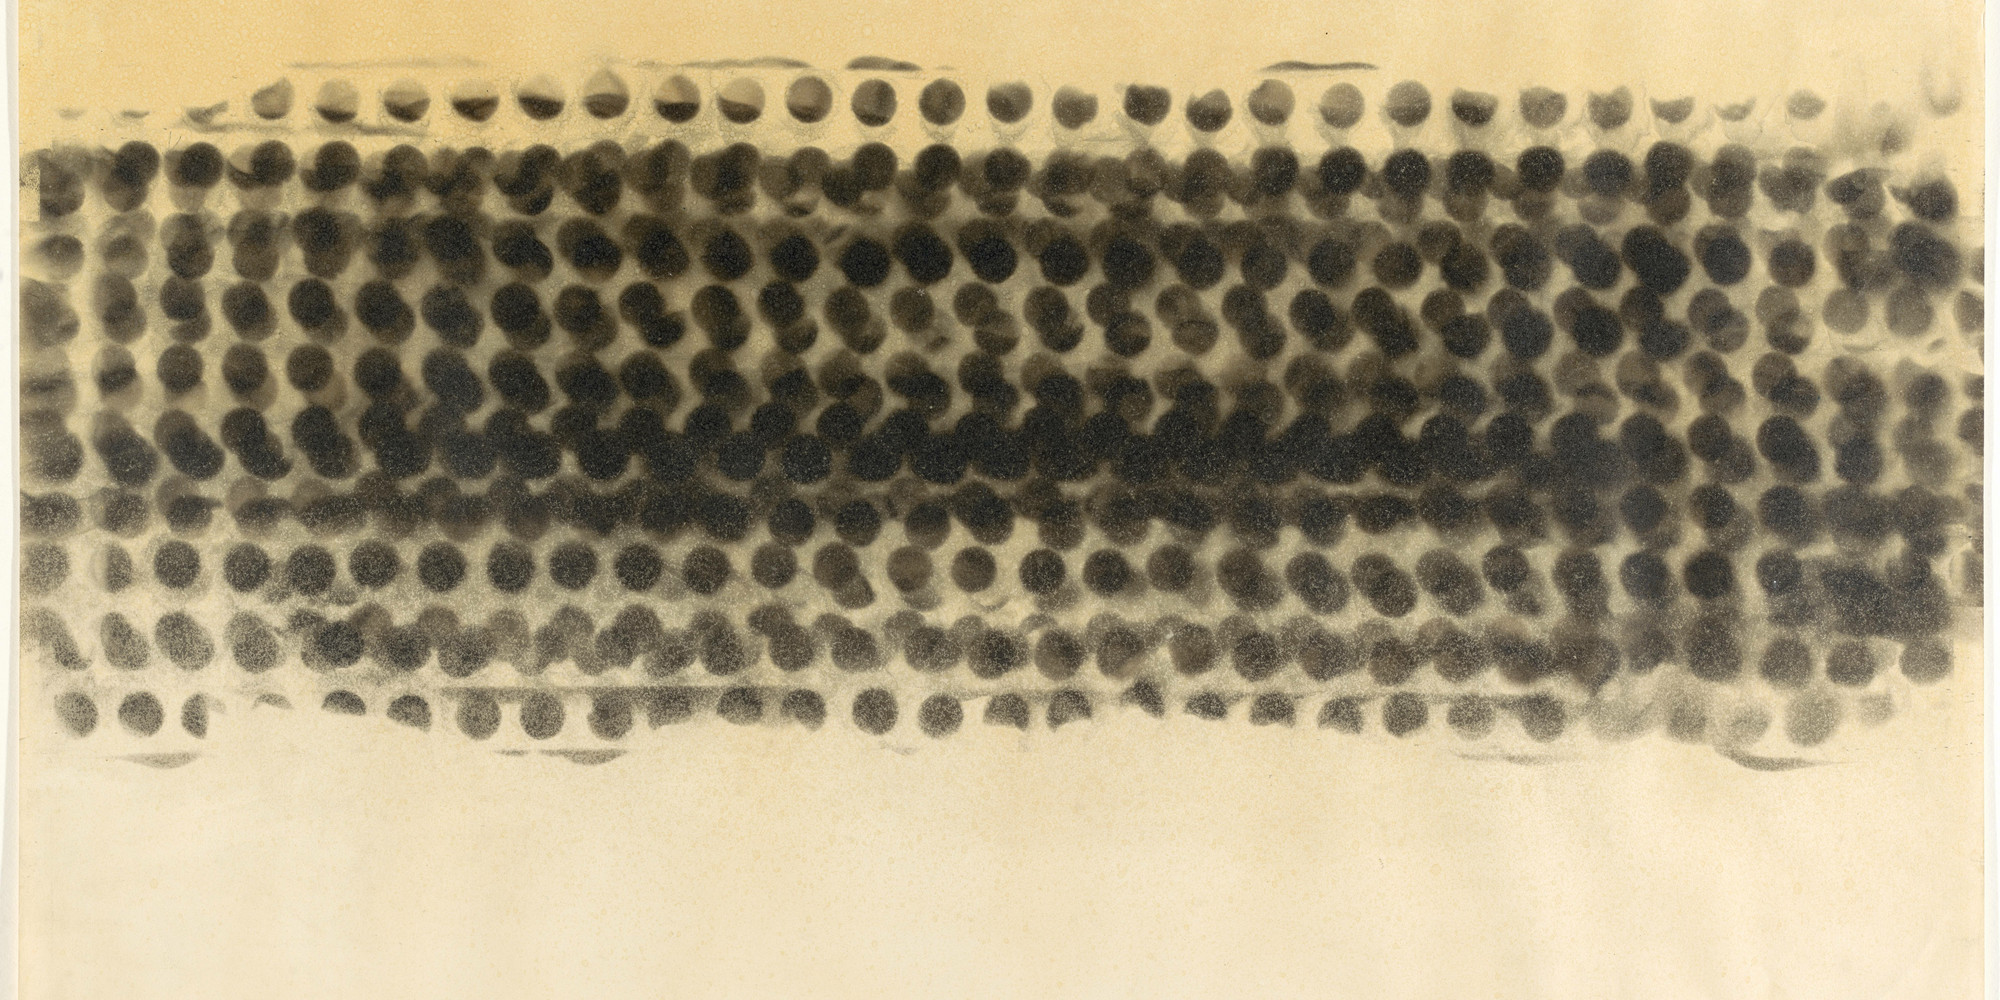 Otto Piene. Untitled (Smoke Drawing). 1959. Soot on paper, 20 × 29&#34; (51 × 73 cm). Purchased with funds provided by Sheldon H. Solow. © 2020 Otto Piene/Artists Rights Society (ARS), New York/VG Bild-Kunst, Germany